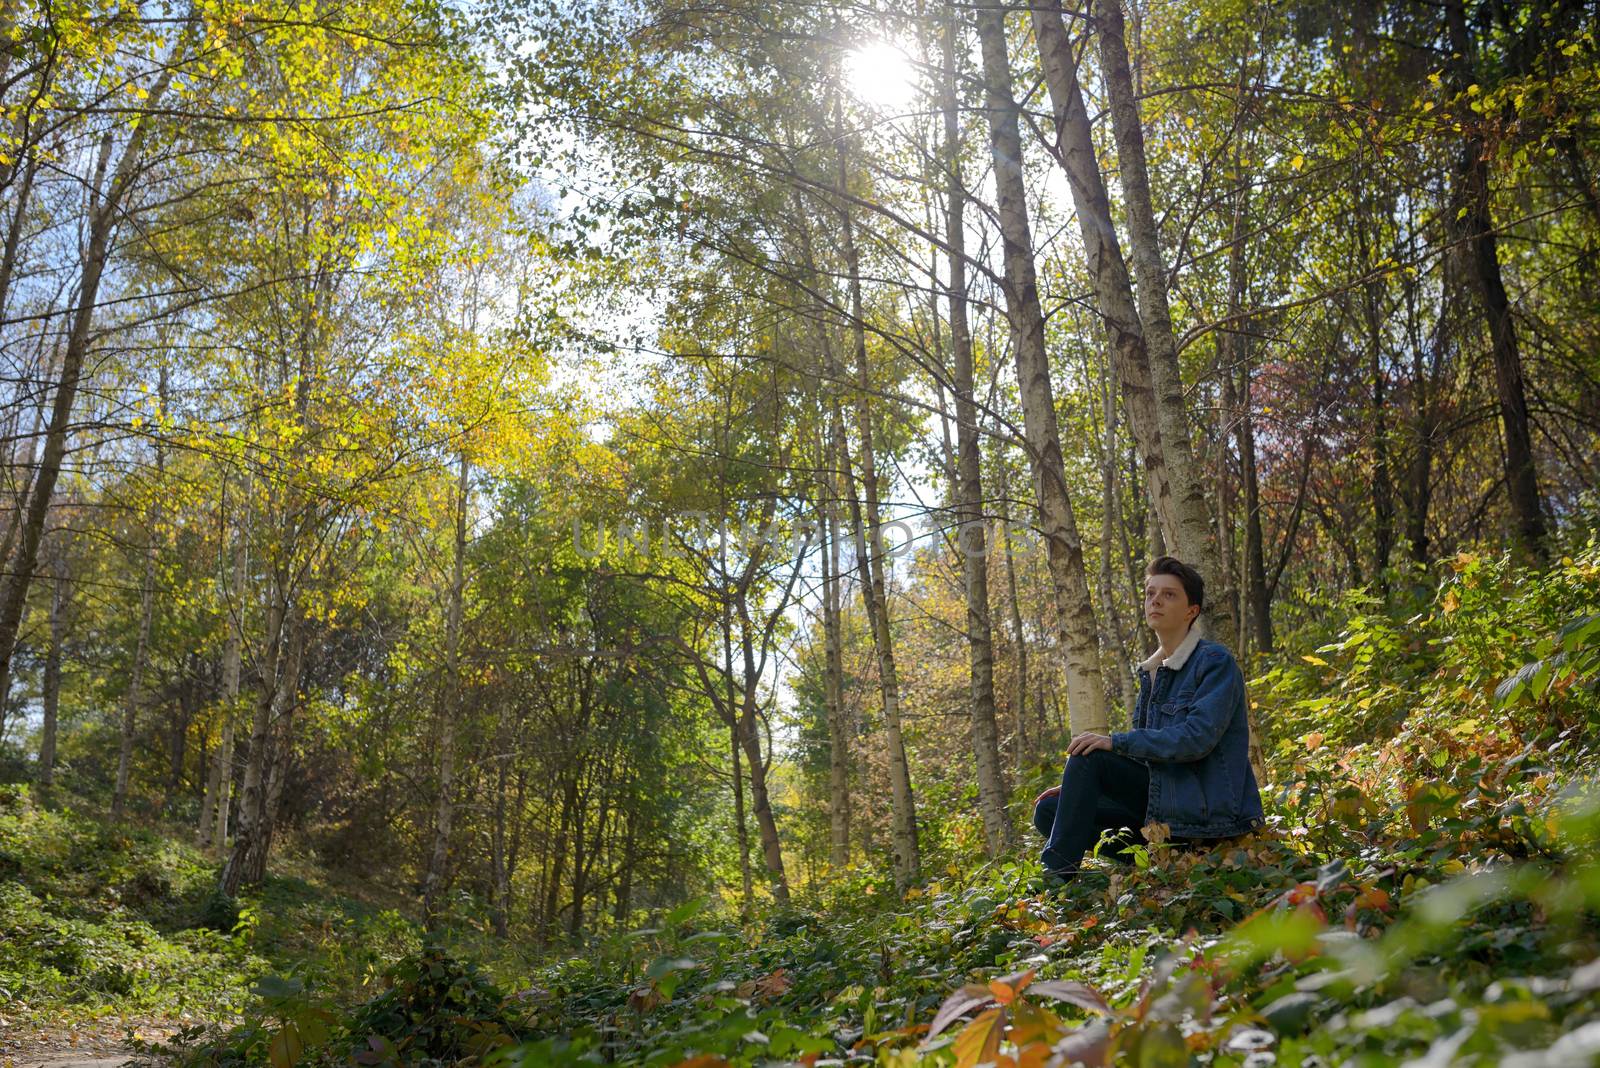 Youth boy alone in autumn forest by mady70